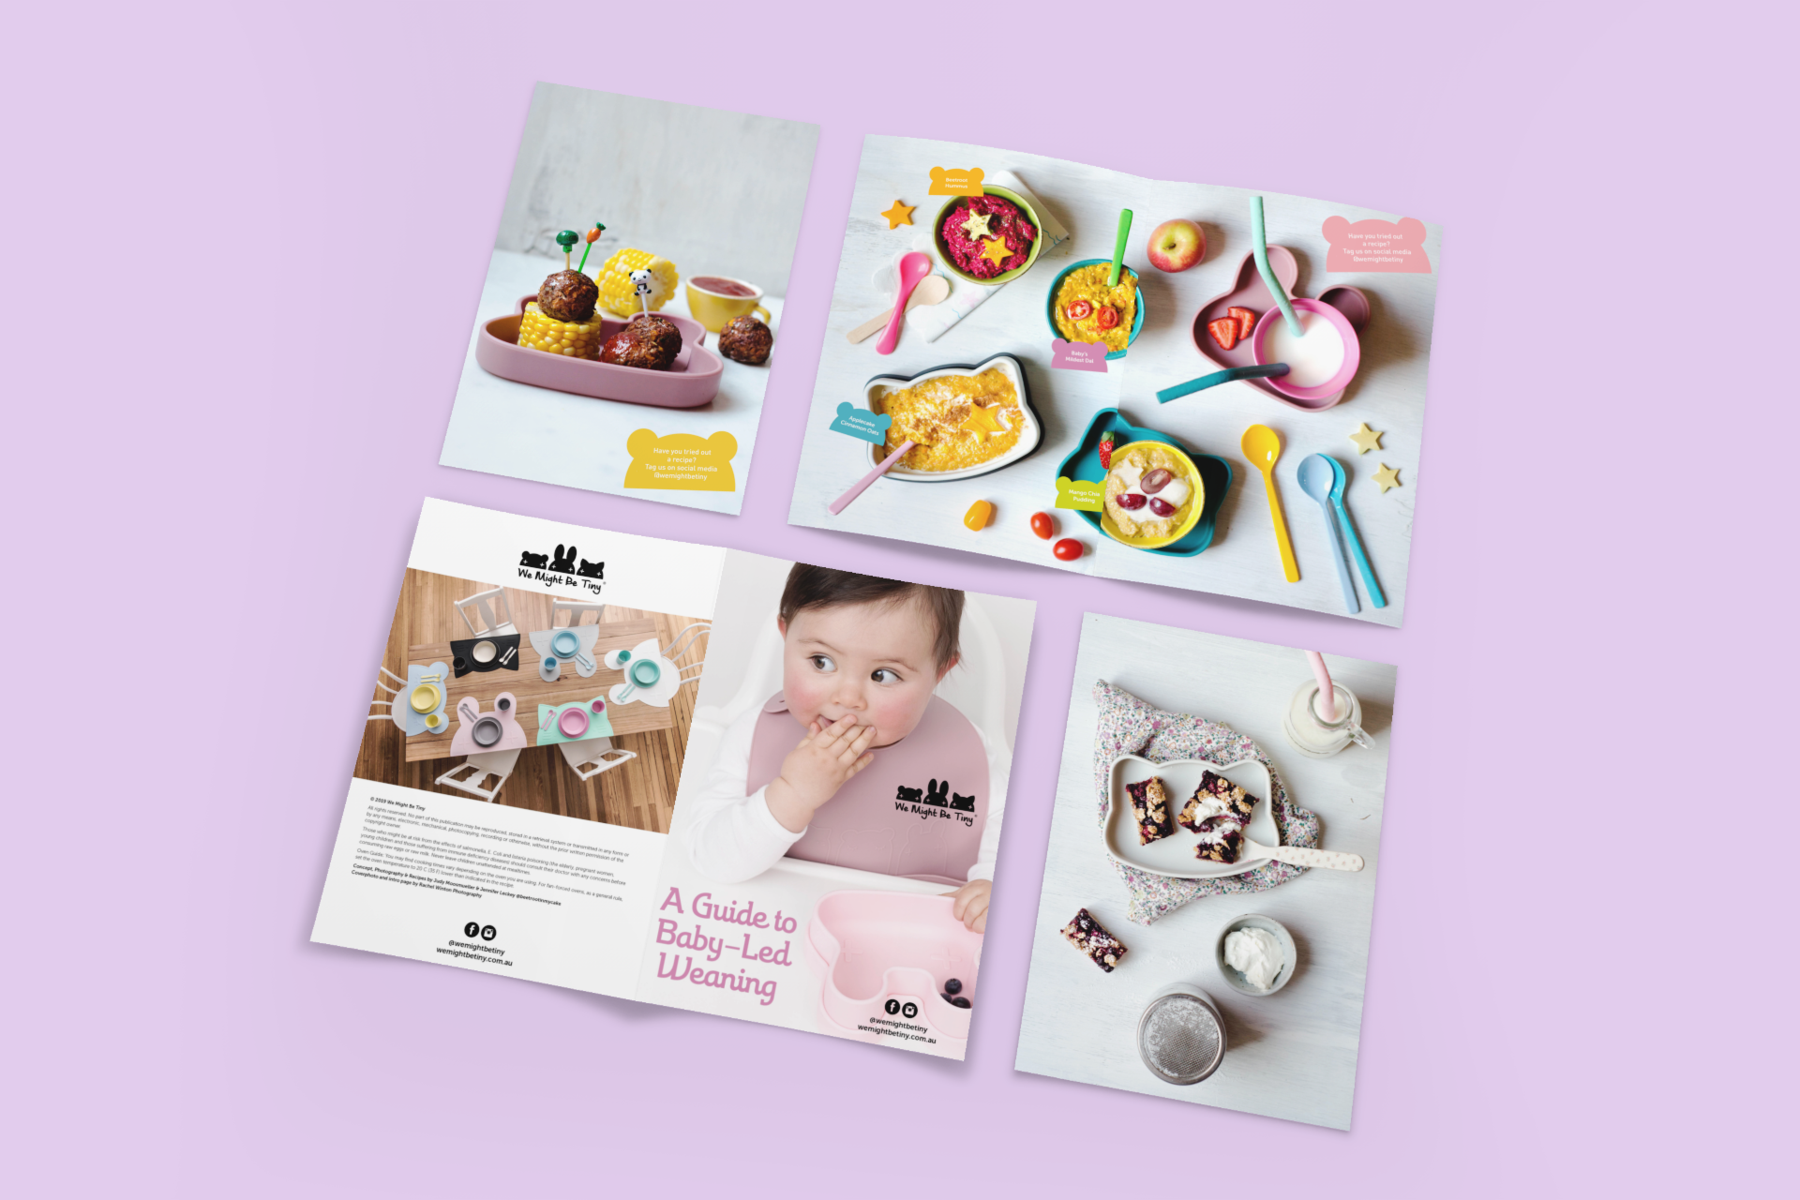 We Might Be Tiny  baby weaning booklet -Angus & Dudley